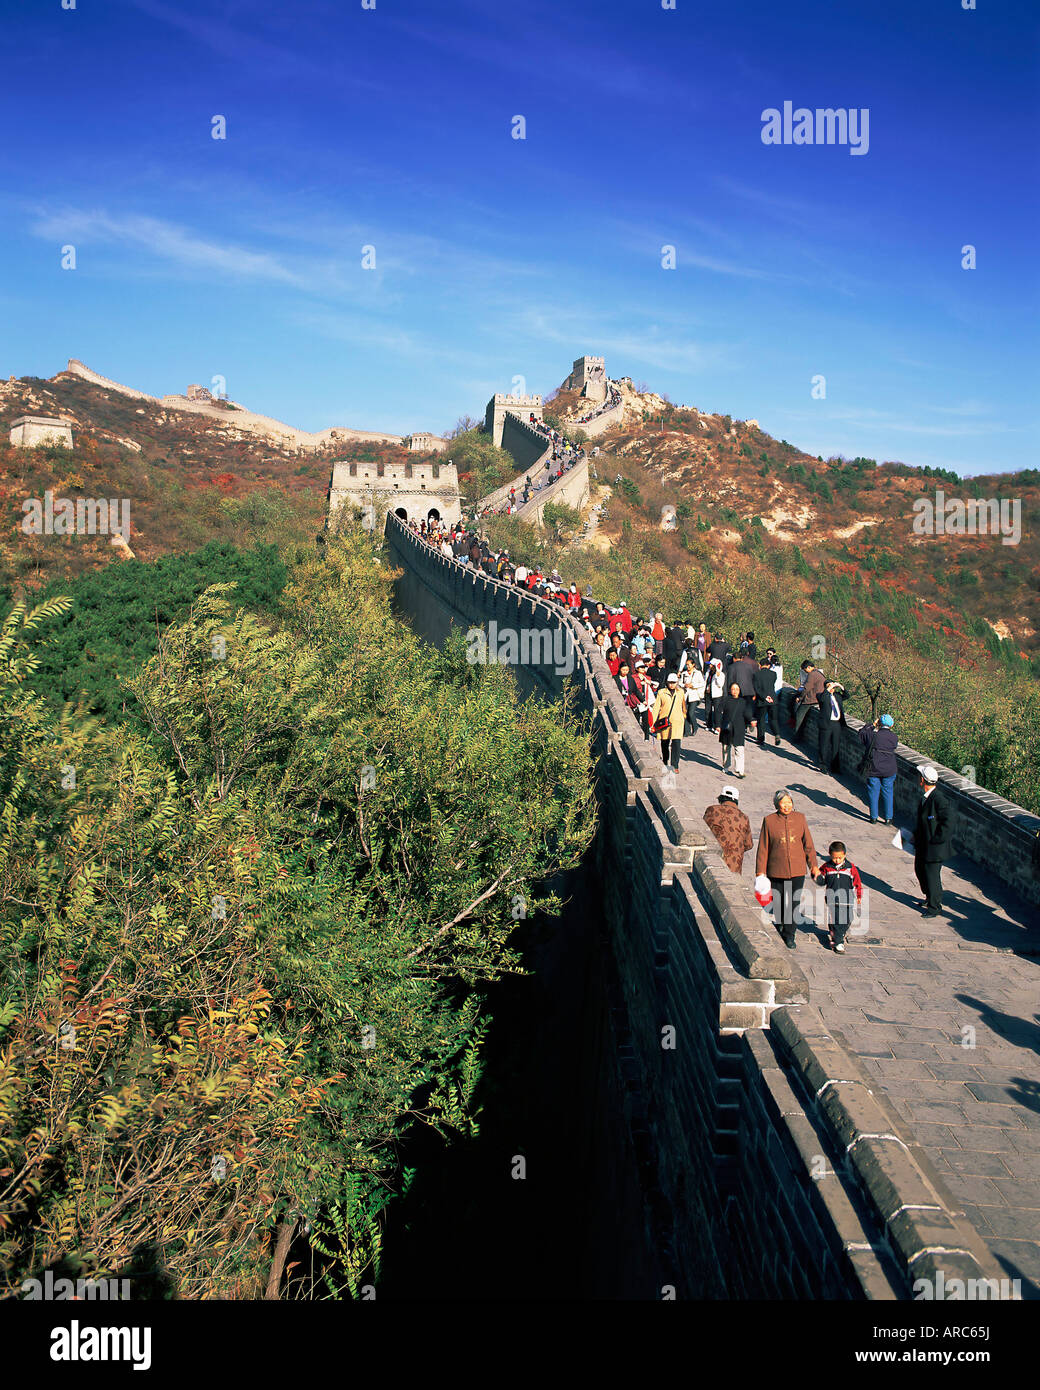 People on the Badaling section, the Great Wall of China, UNESCO World Heritage Site, near Beijing, China, Asia Stock Photo